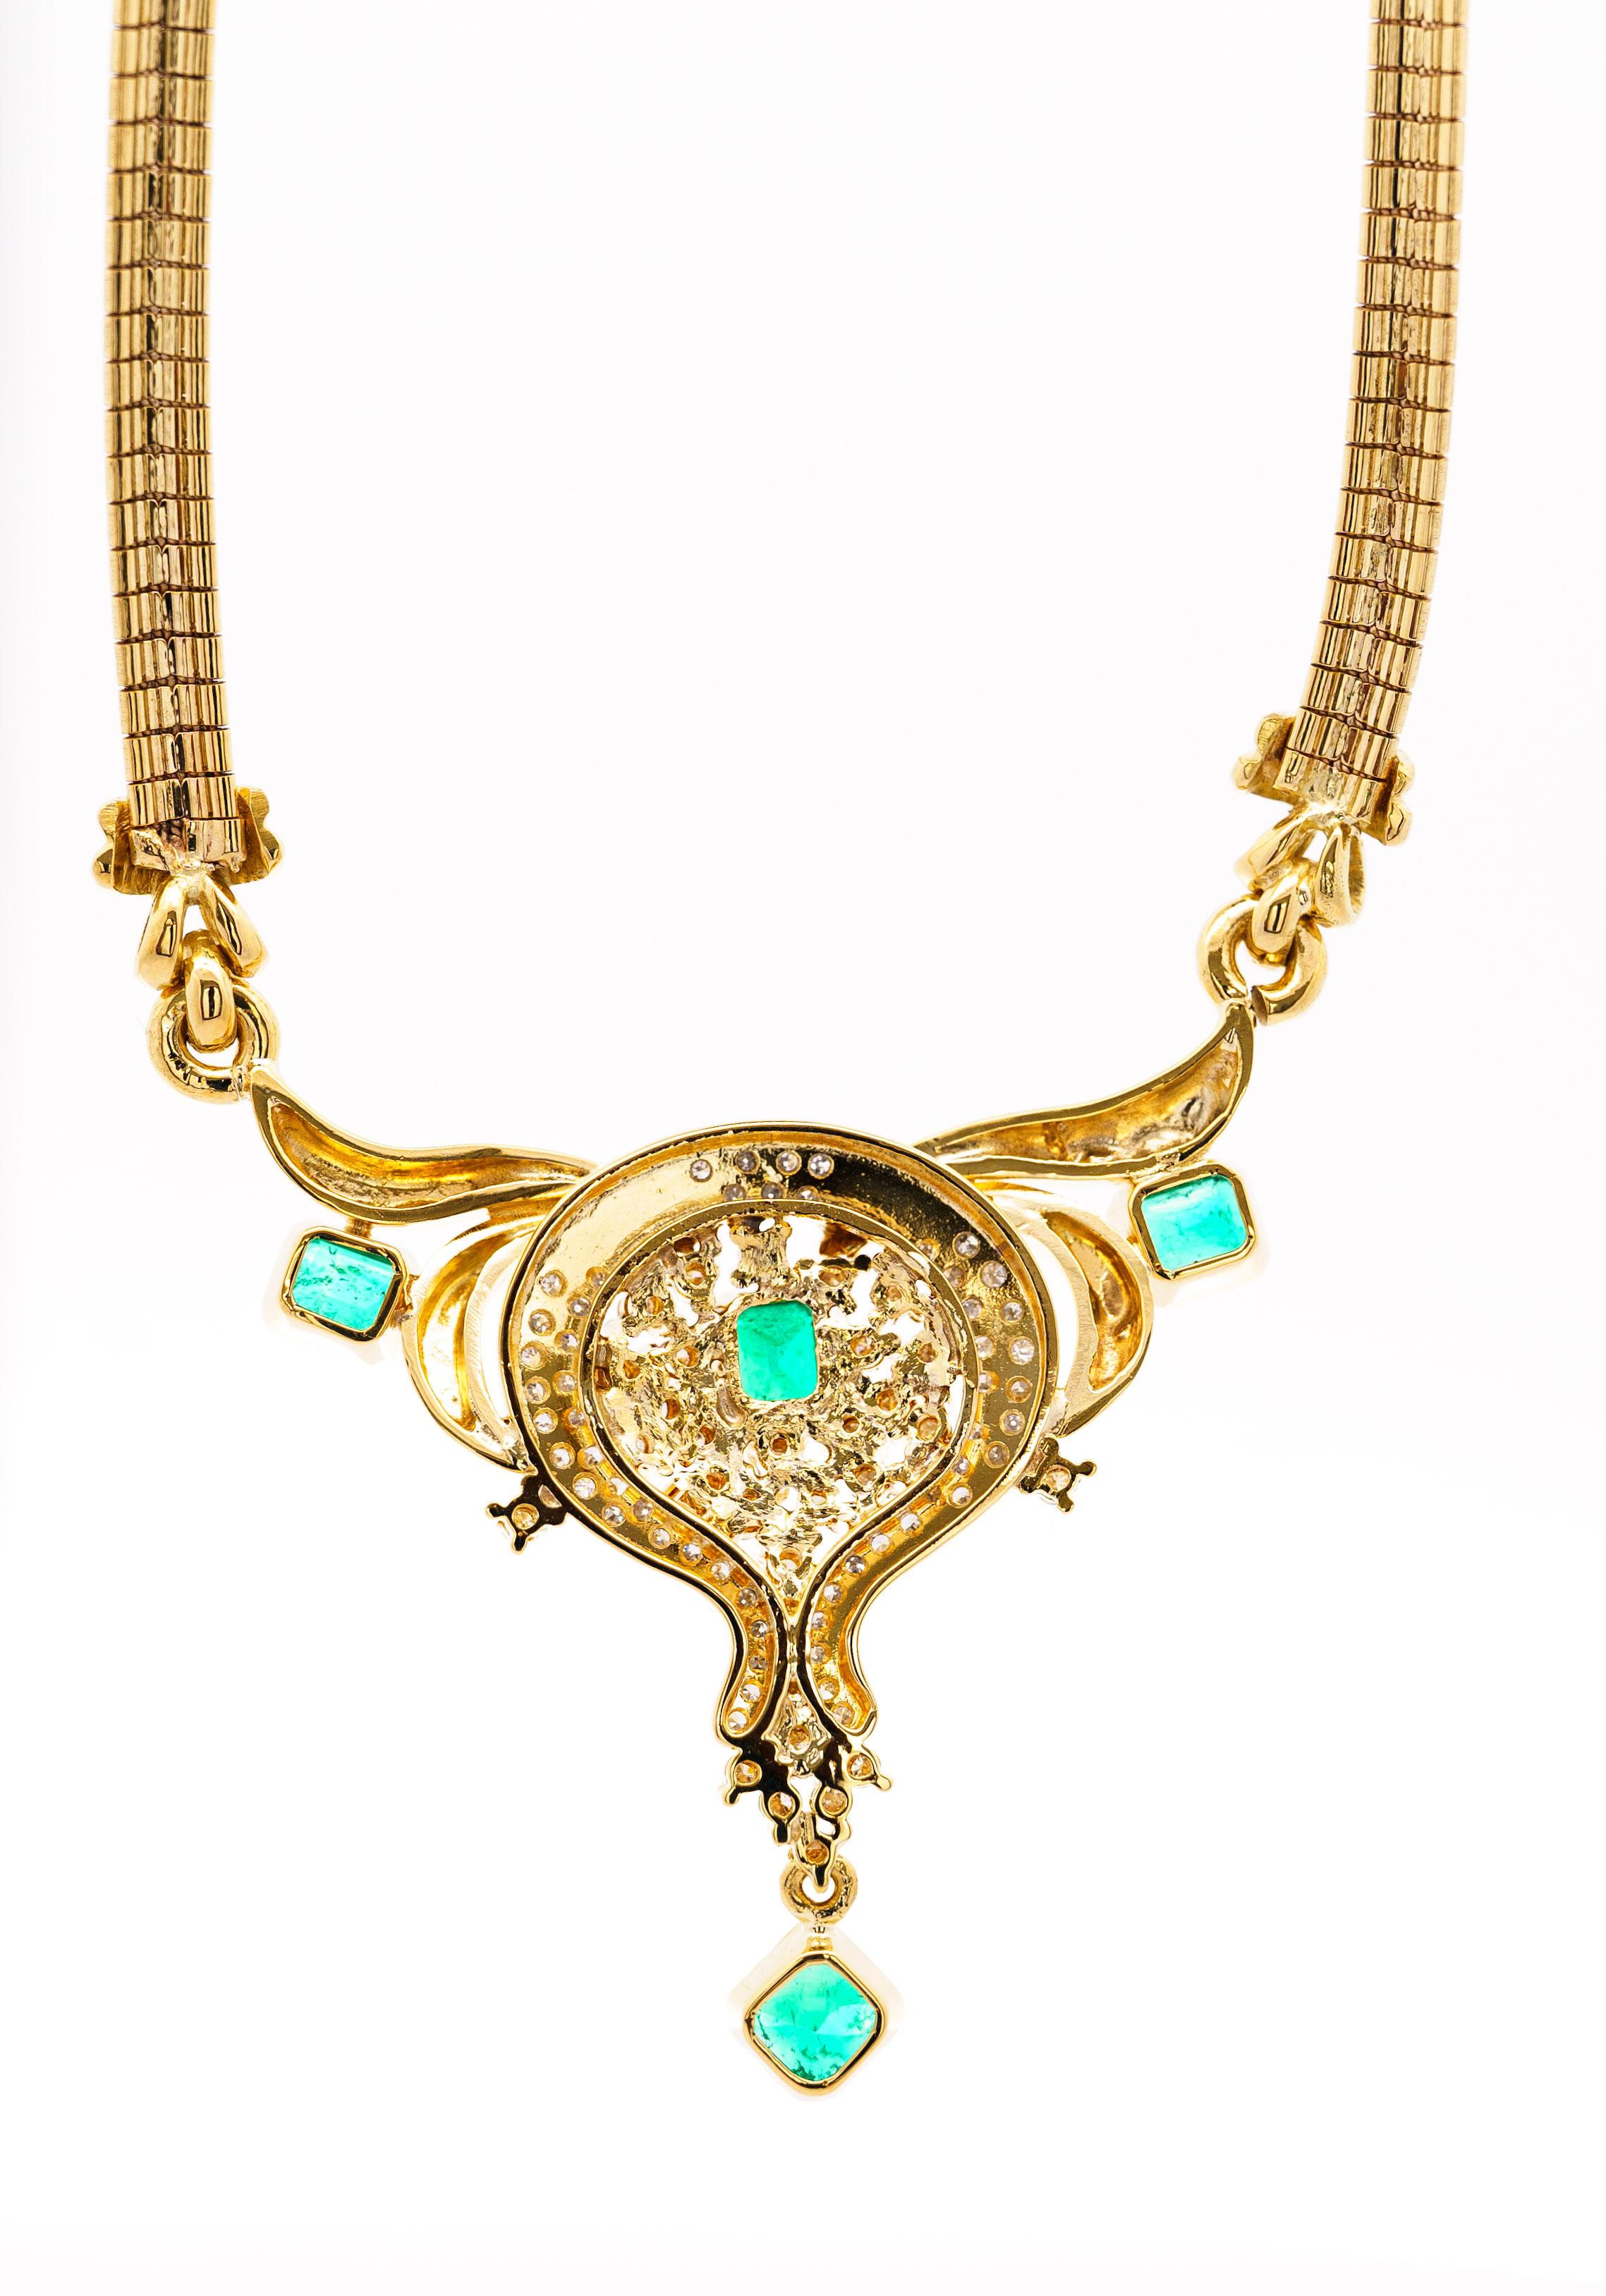 Vintage 5 Carat Emerald & Diamond Necklace in 14K Yellow Gold In Excellent Condition For Sale In Miami, FL